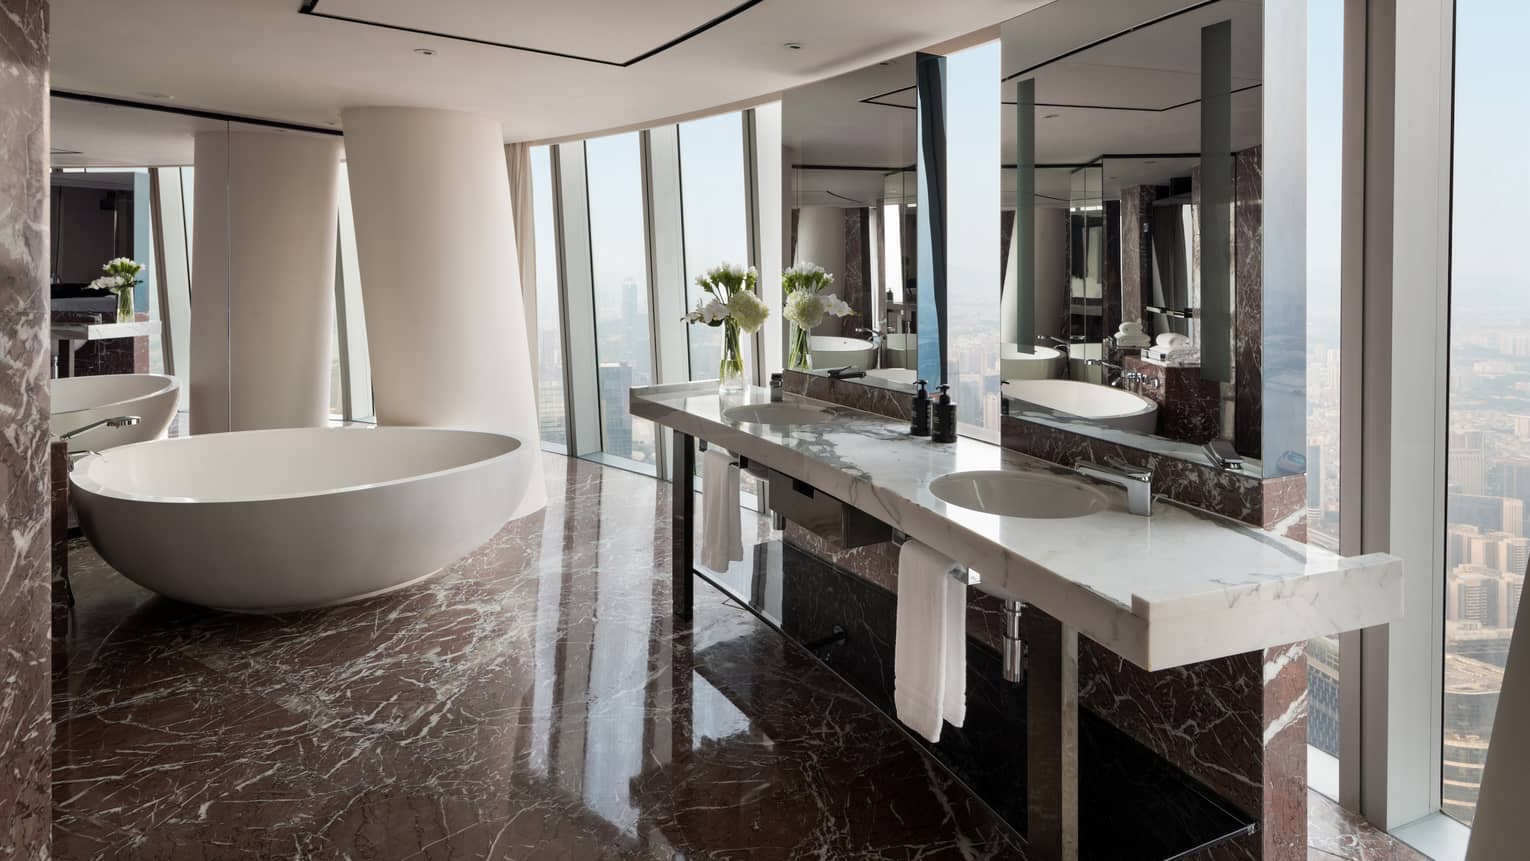 Premier King Bathroom with white marble double vanity, large soaking tub and floor-to-ceiling windows